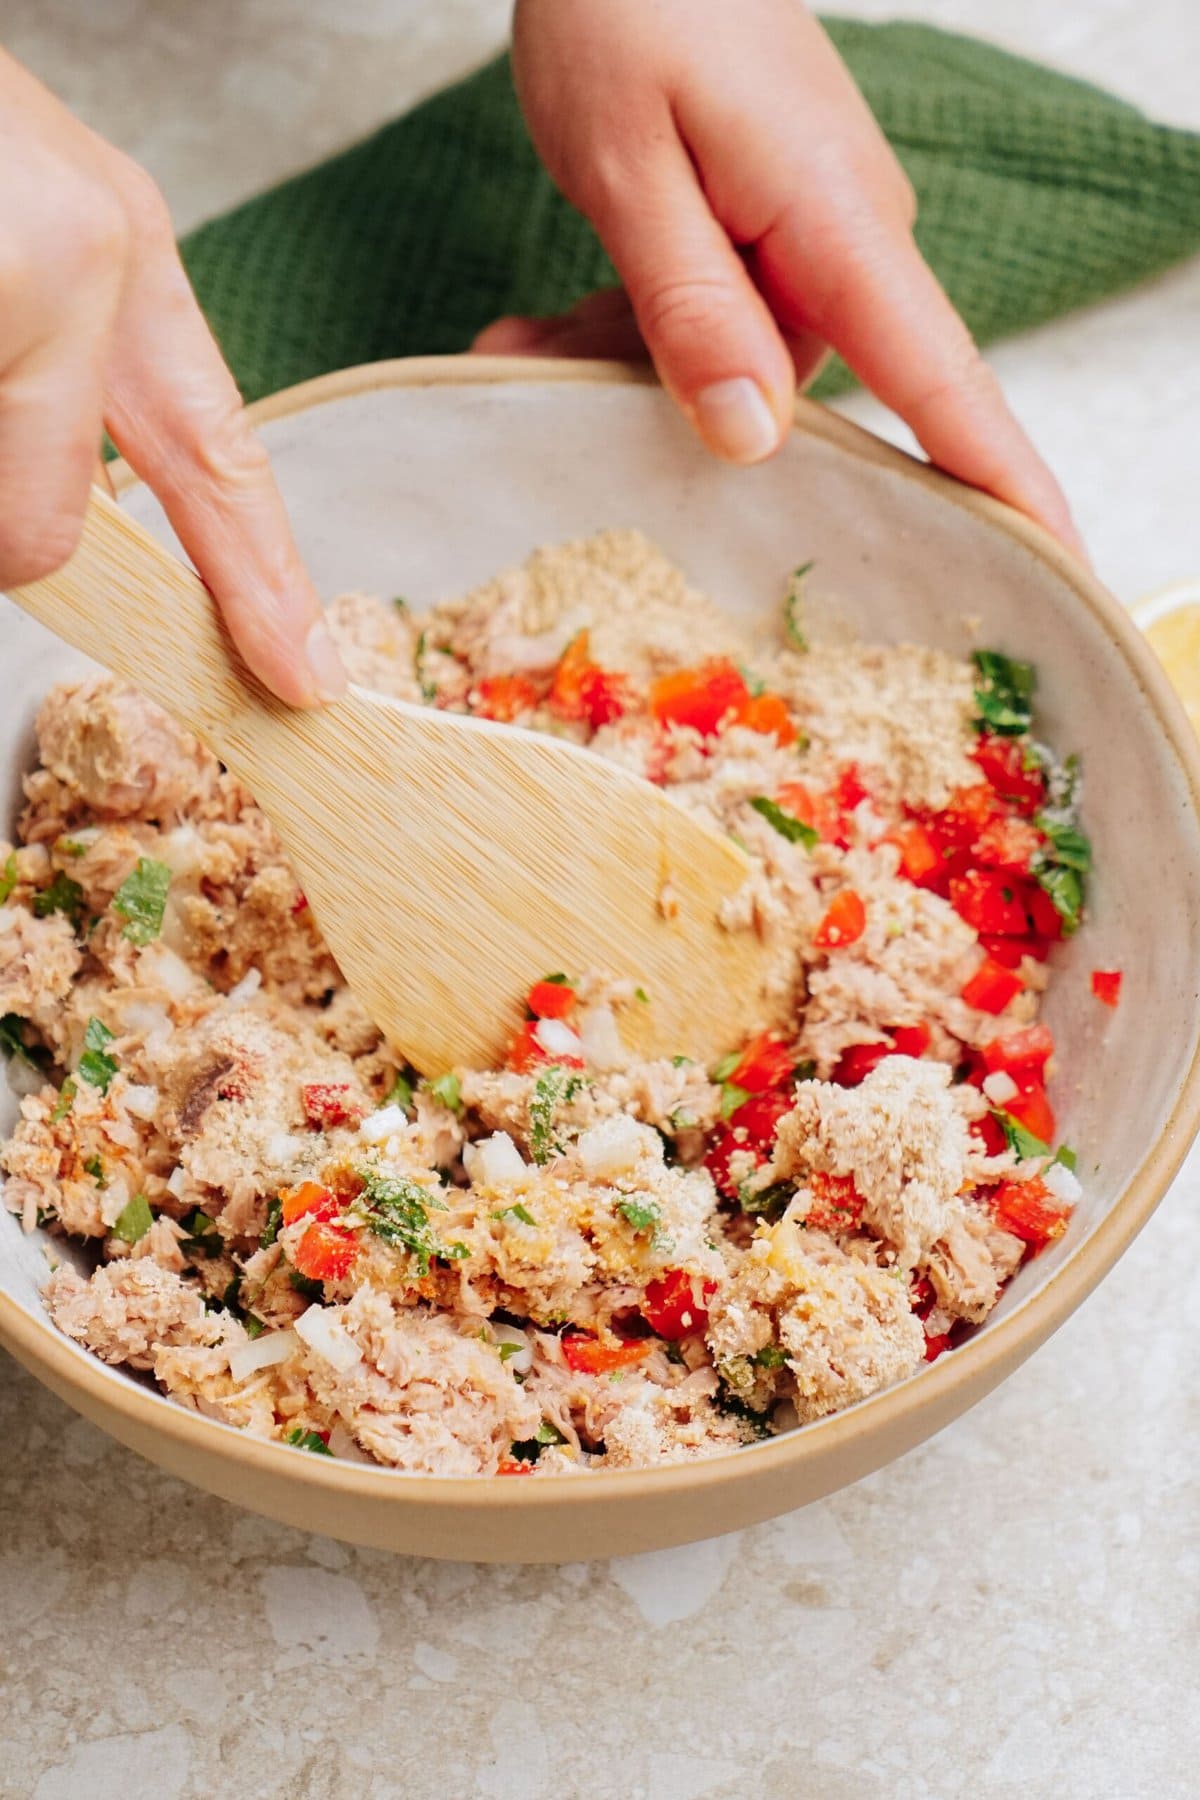 A person mixing a bowl of ground meat, chopped red bell peppers, herbs, and bread crumbs with a wooden spatula, preparing delicious tuna patties.